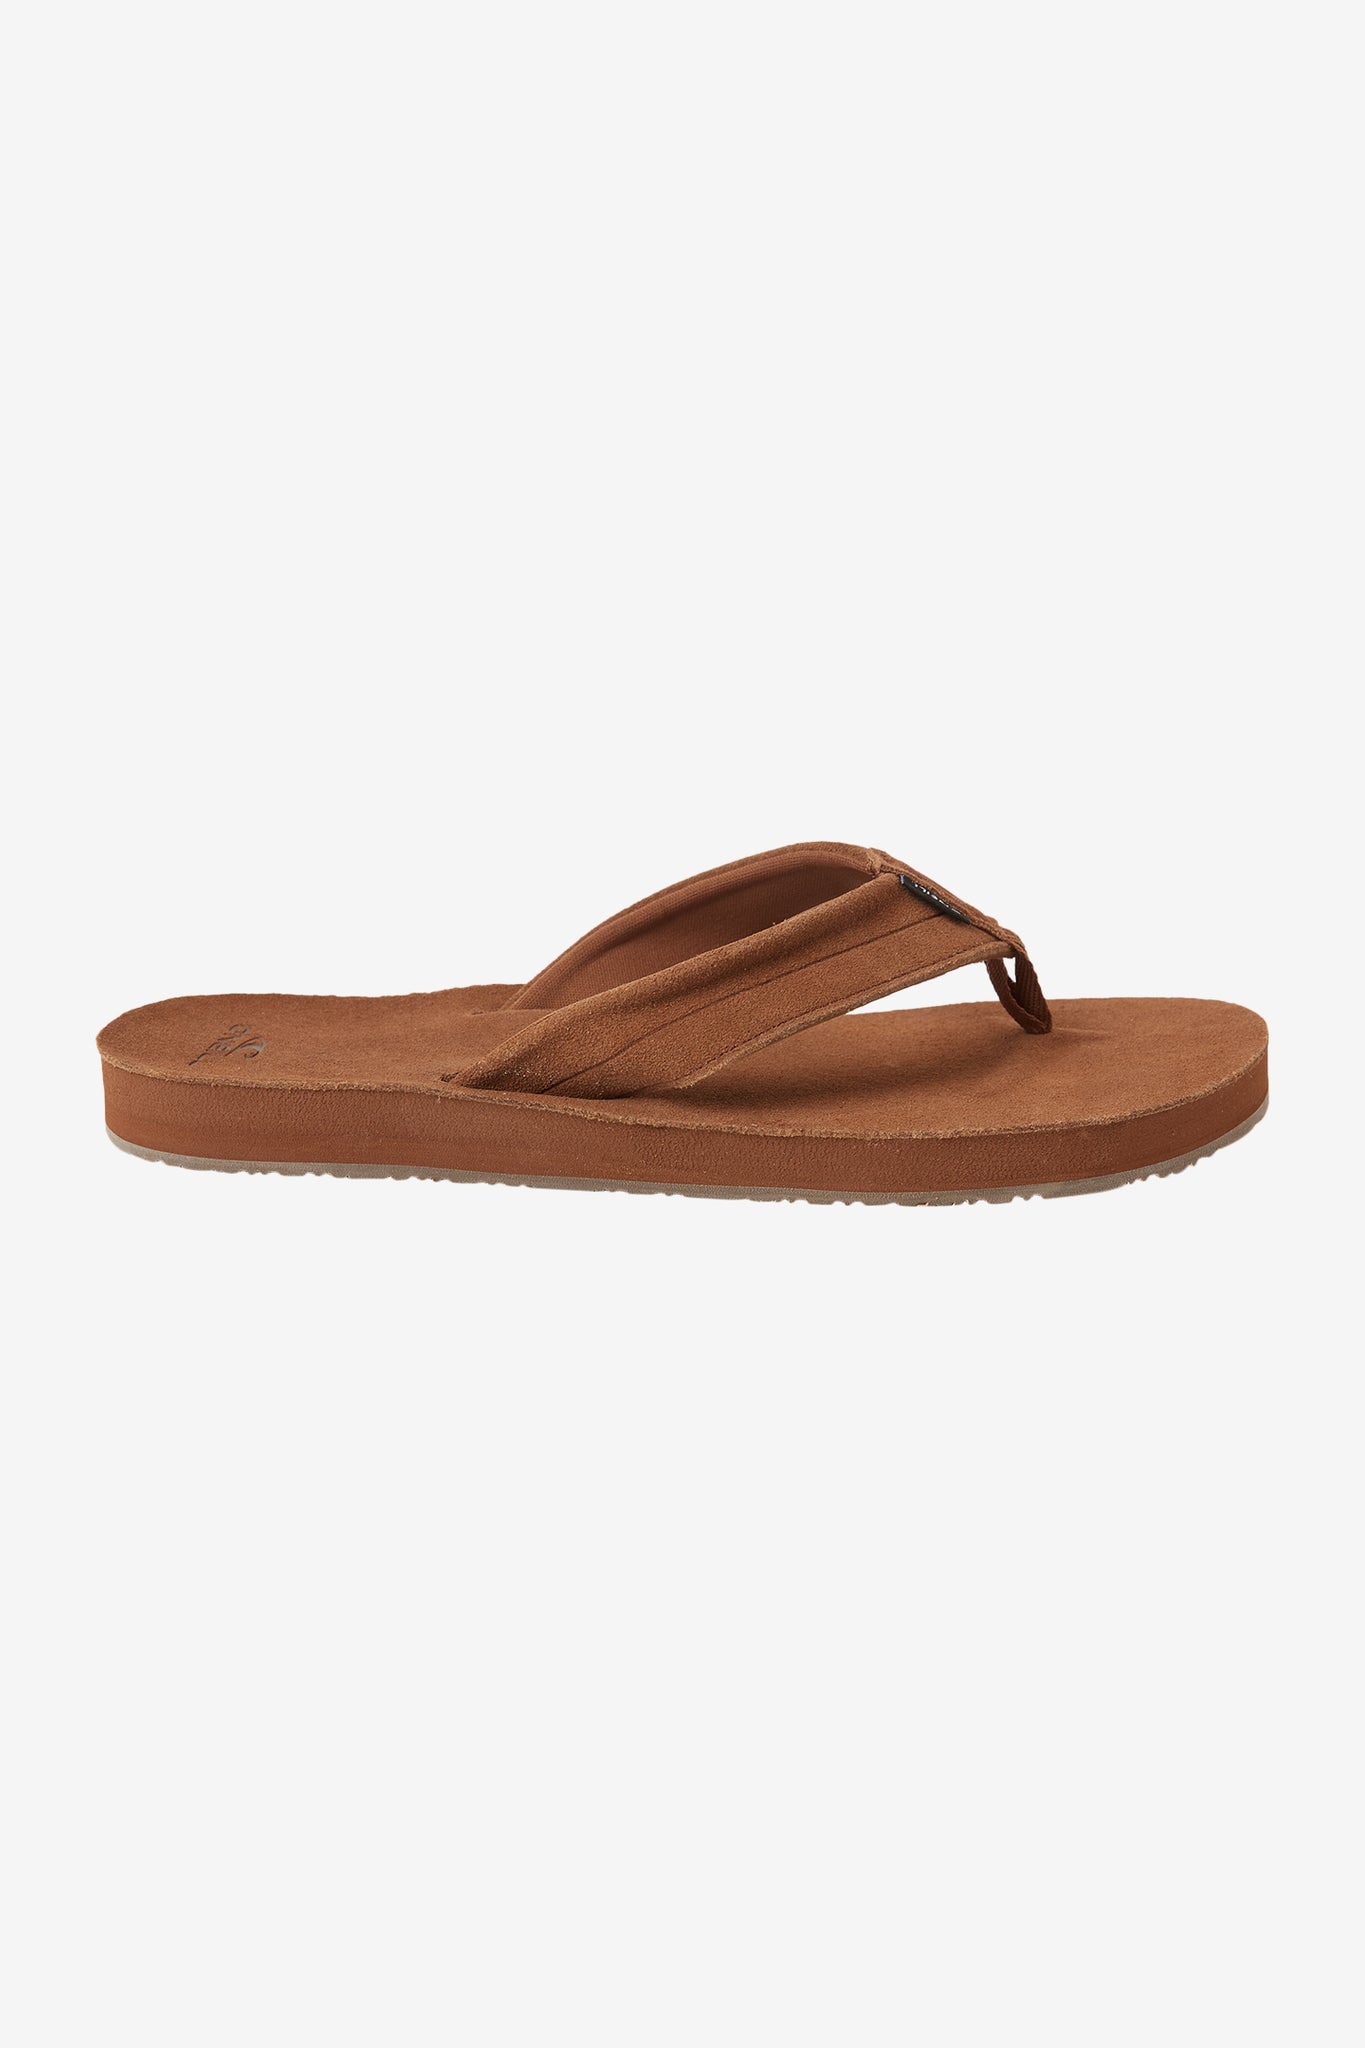 GROUNDSWELL SANDALS